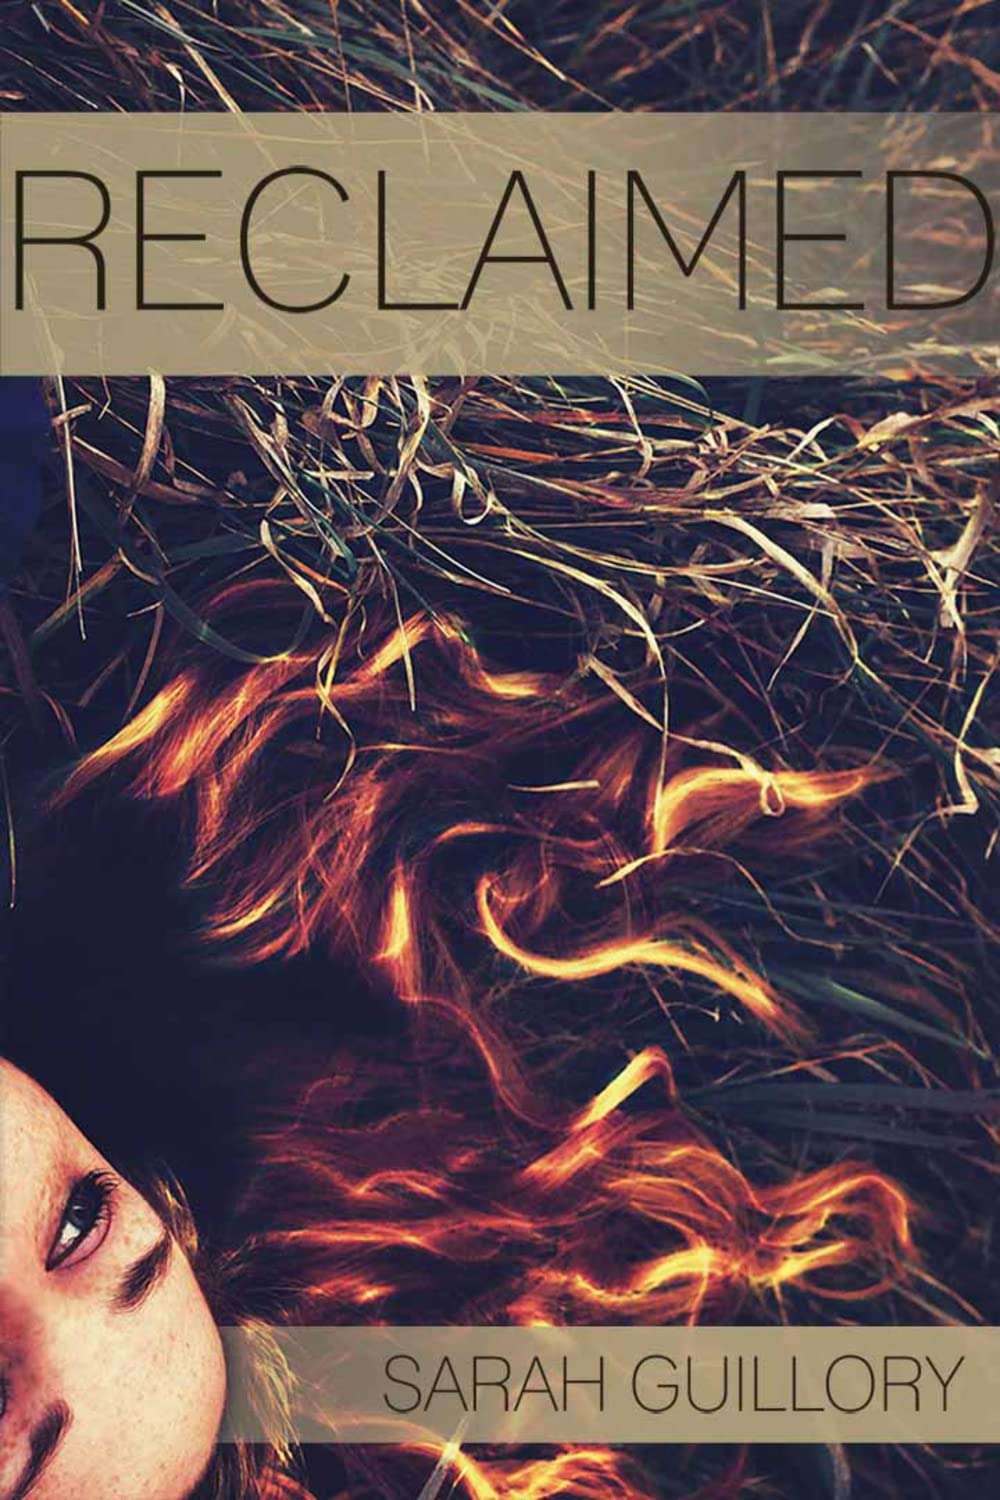 Reclaimed by Sarah Guillory